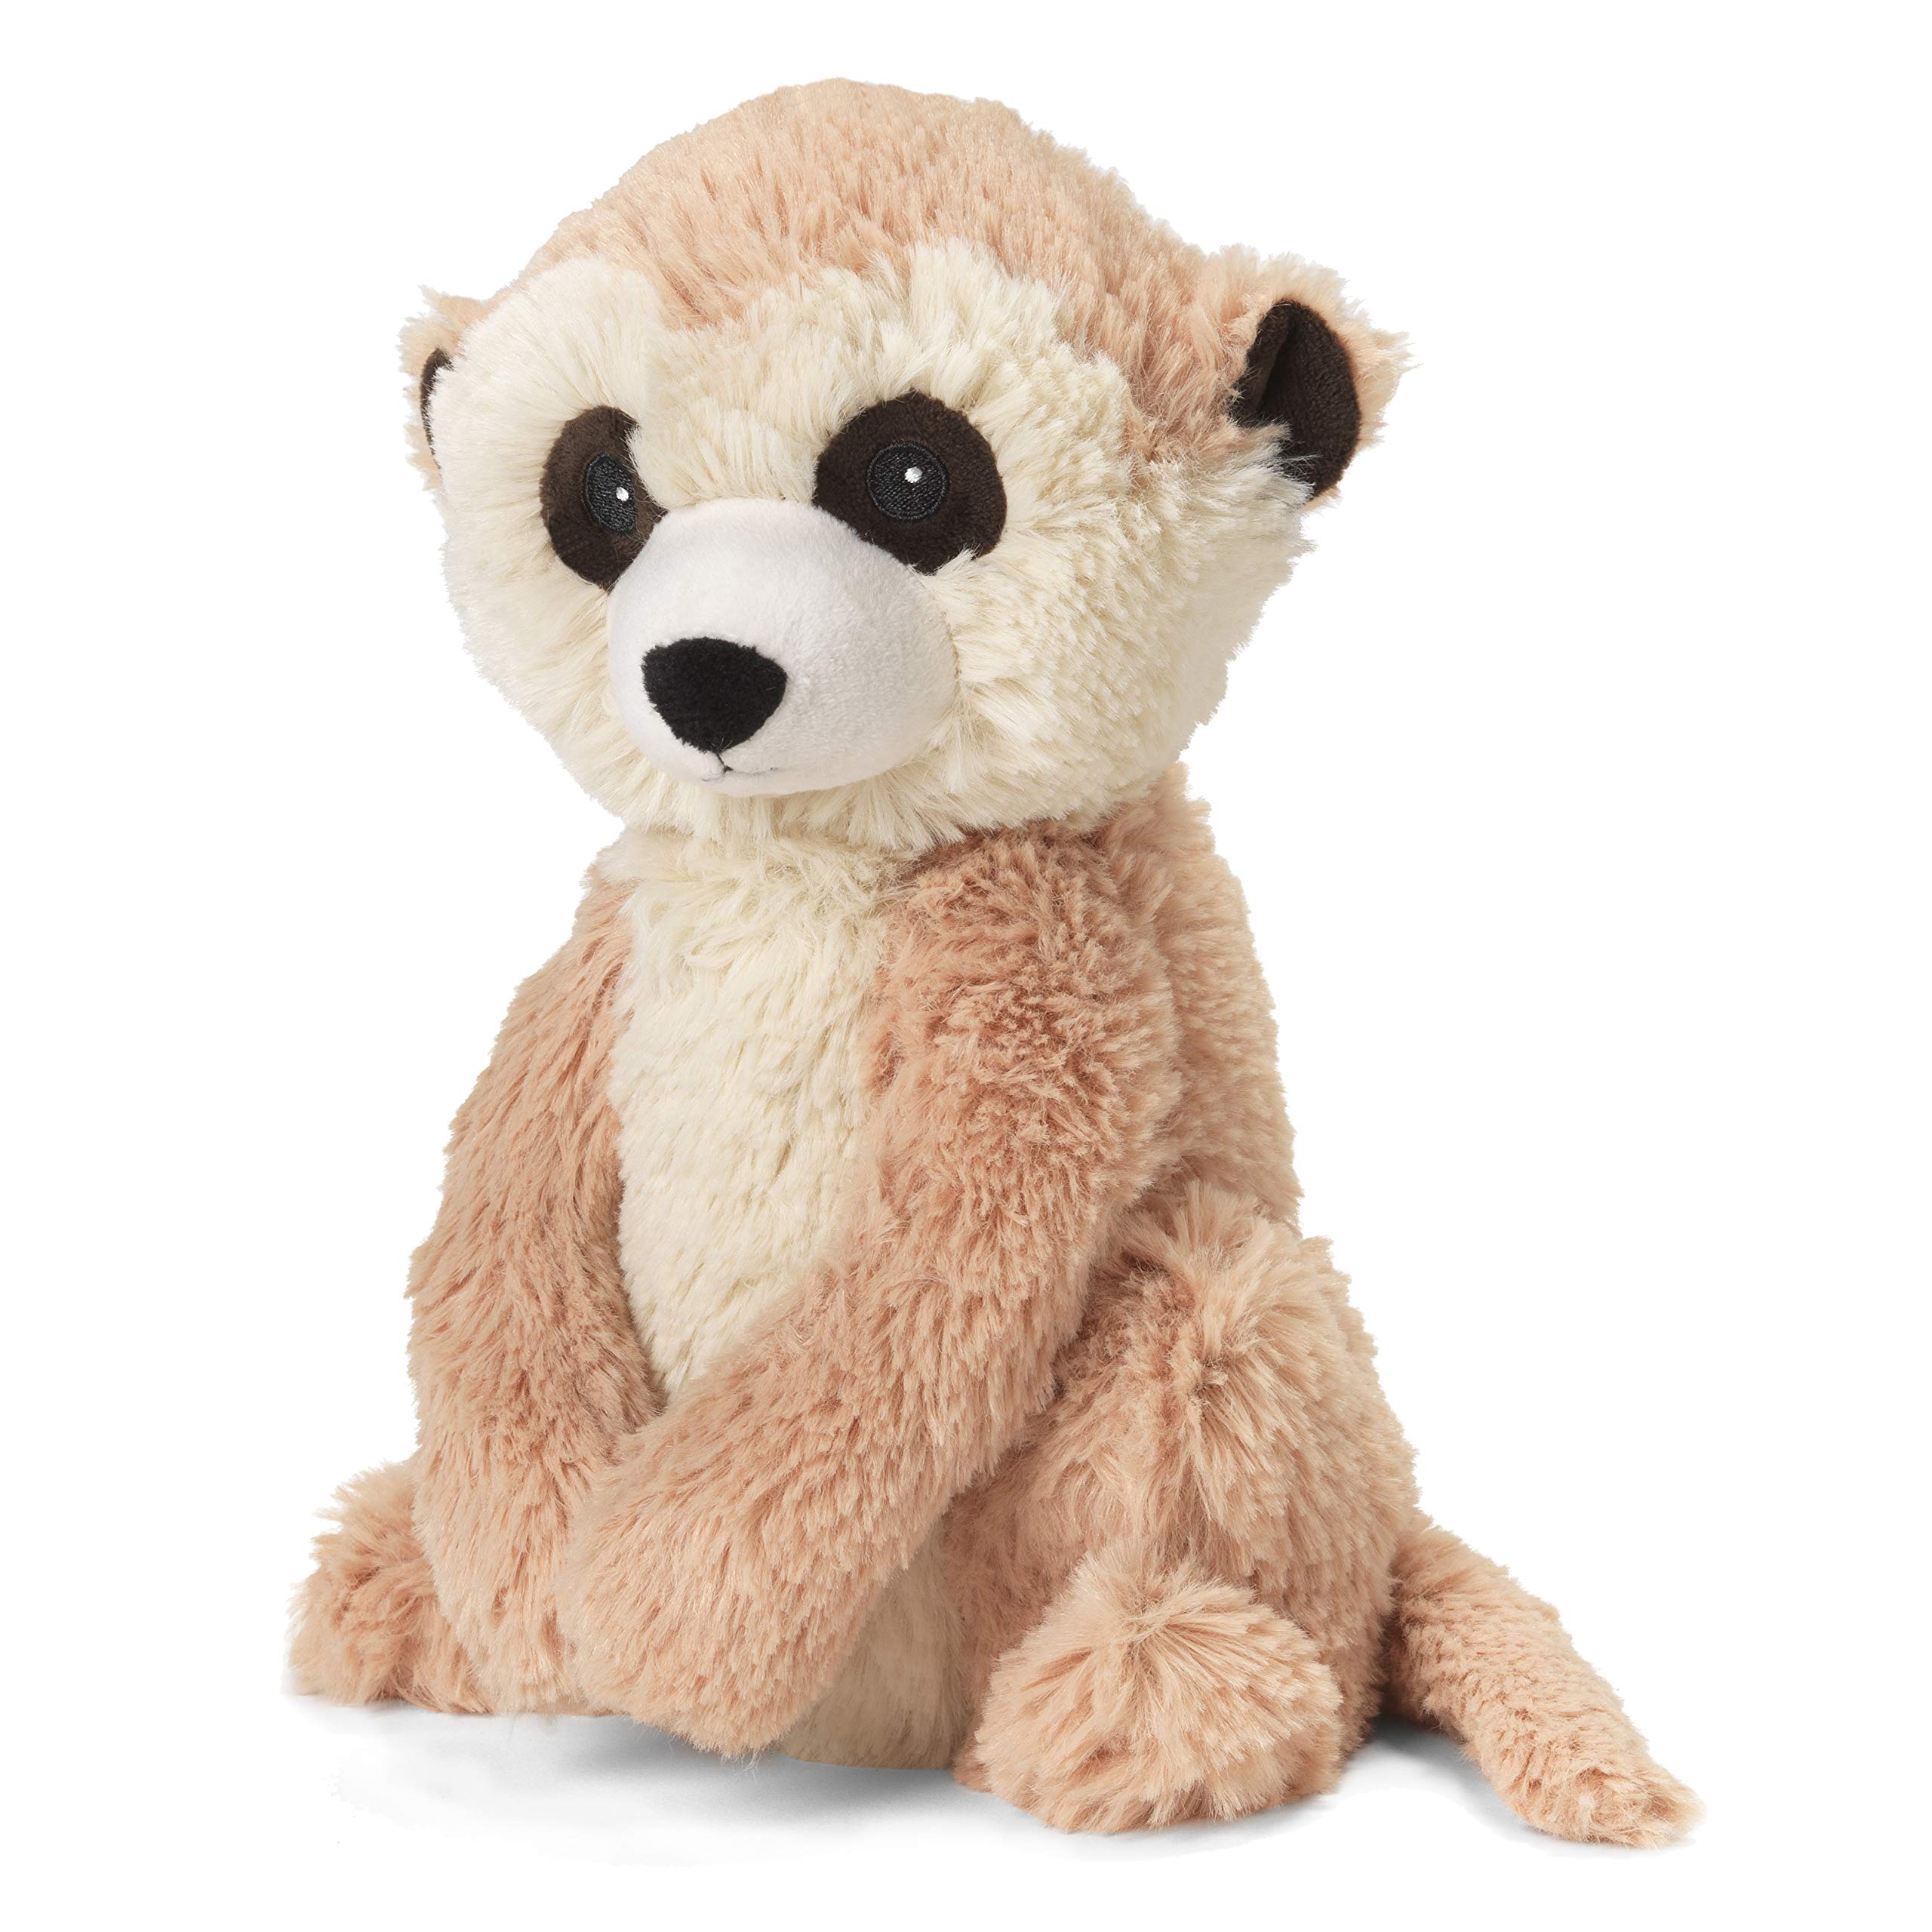 Warmies Microwavable French Lavender Scented Plush Meerkat Warmies | eBay